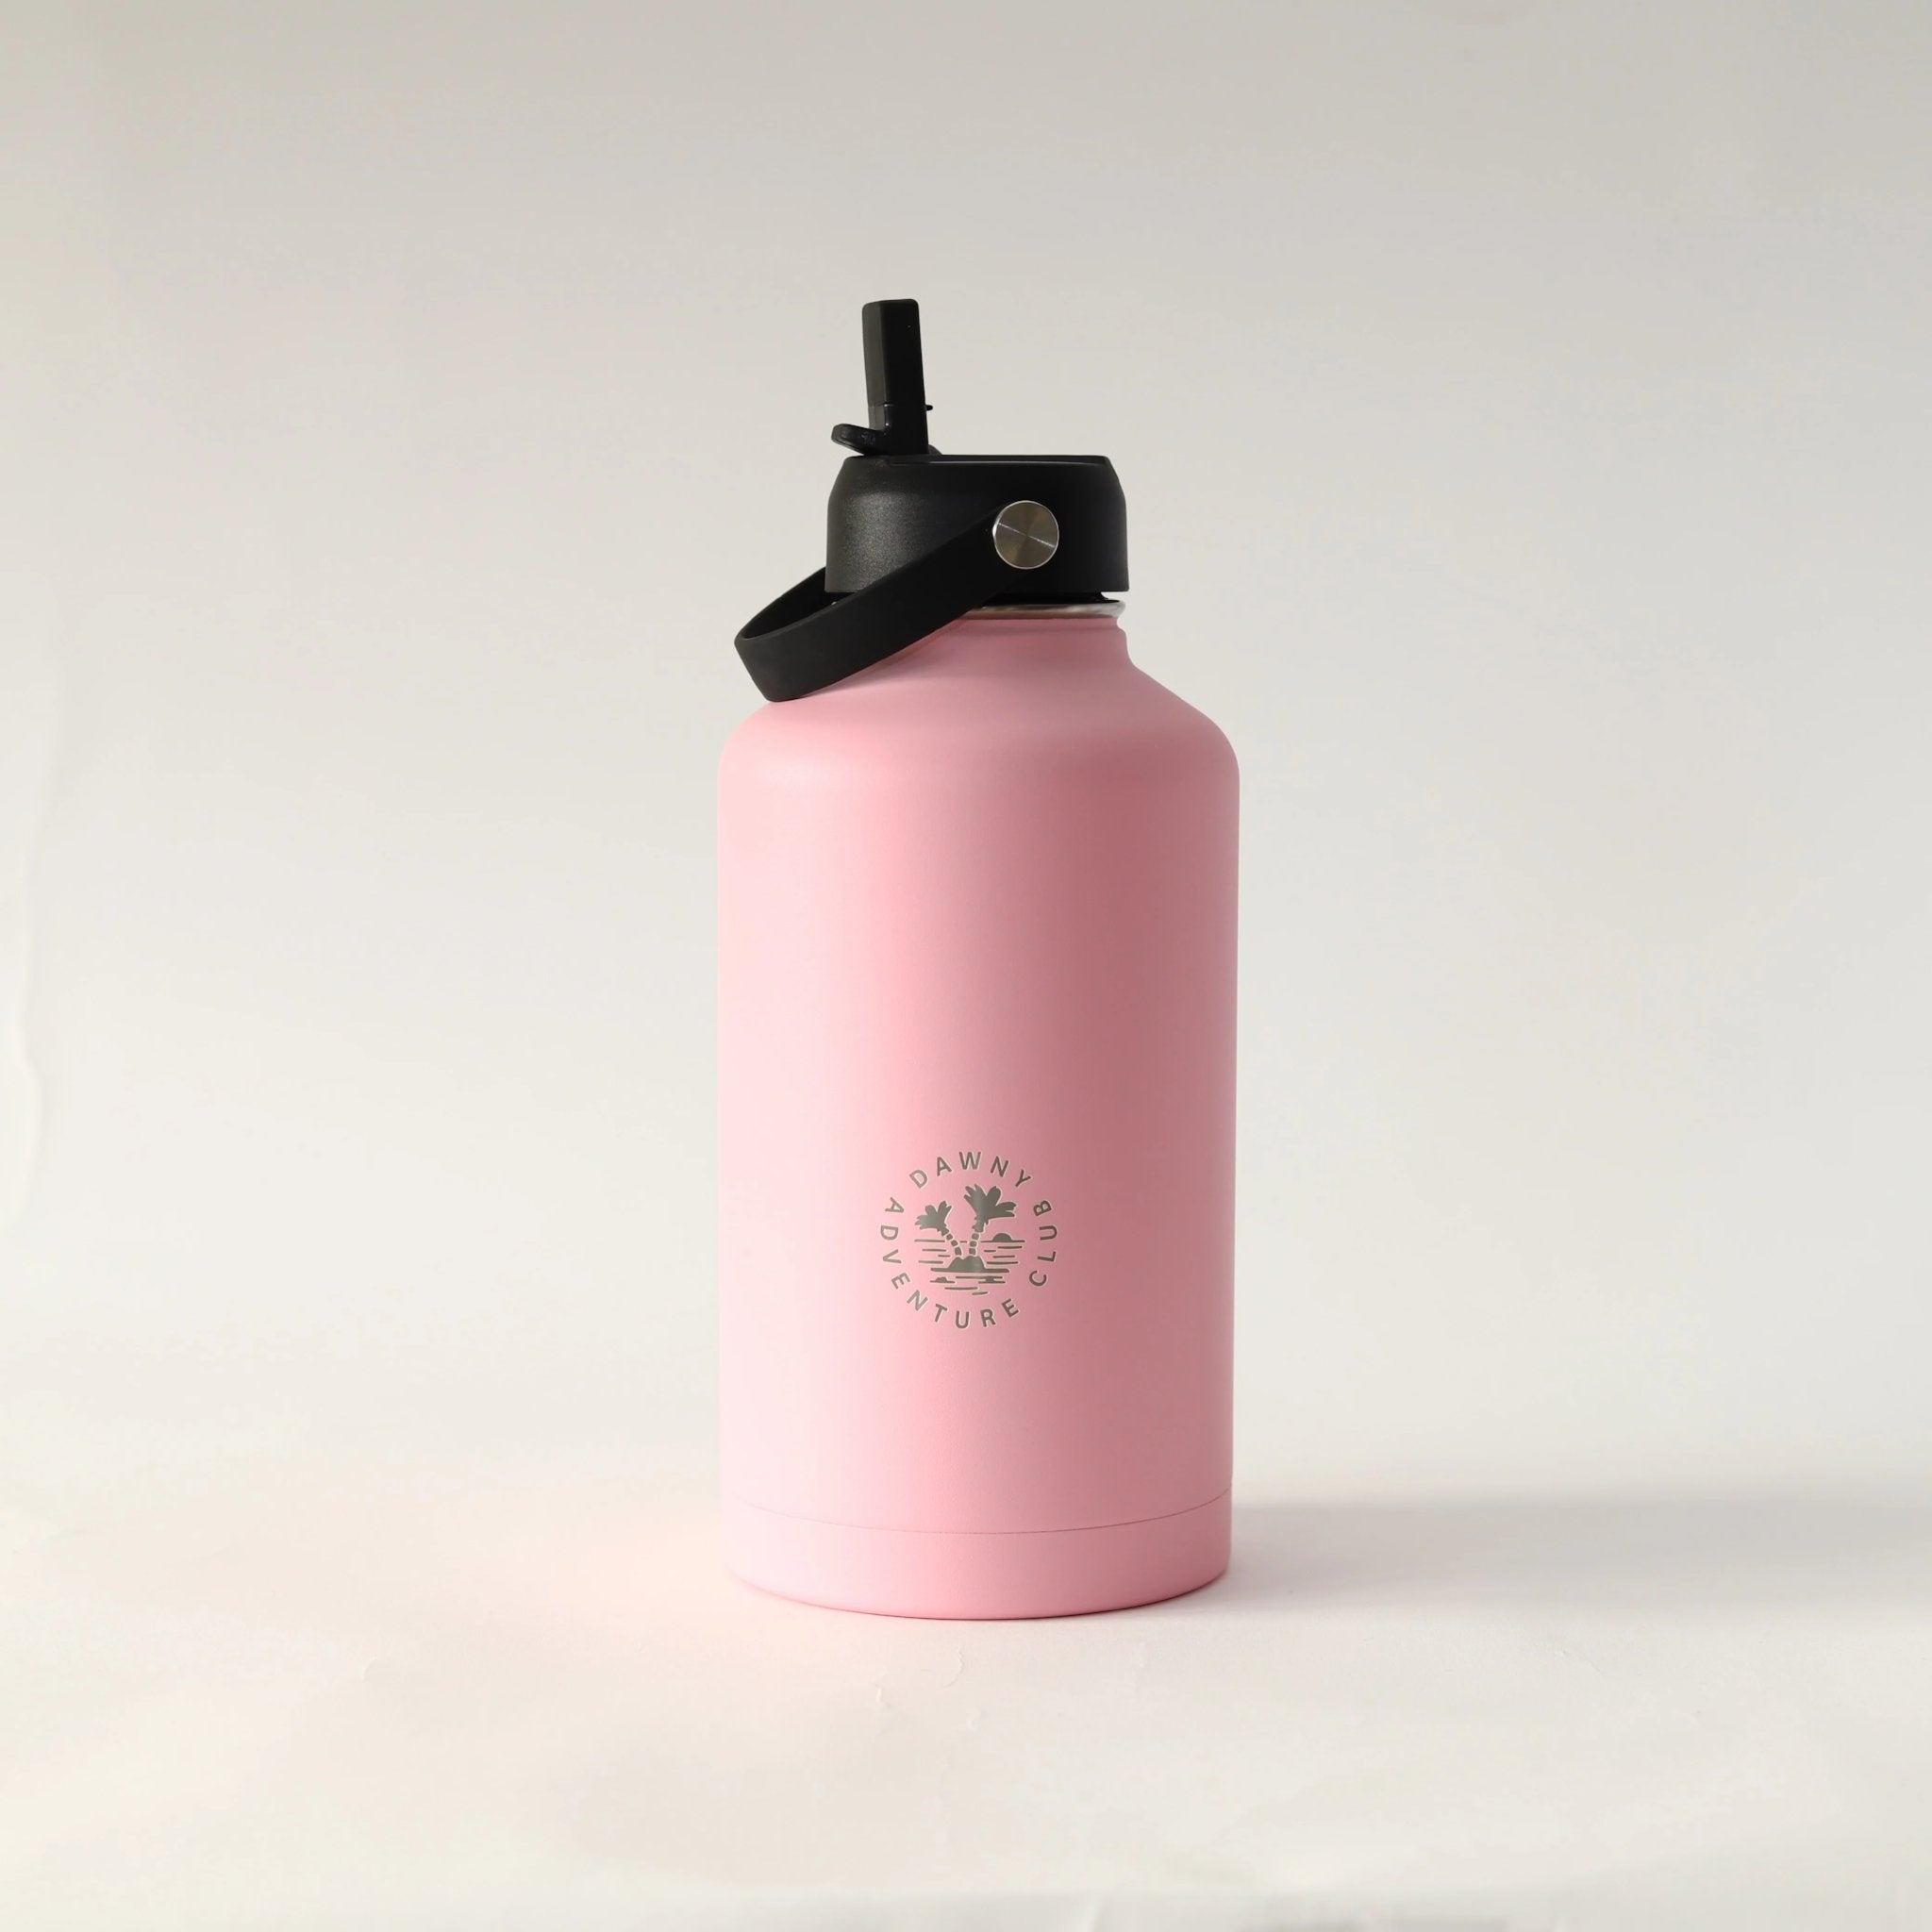 1900ml Pink Dawny Adventure Club Drink Bottle with sipper lid with swing handle